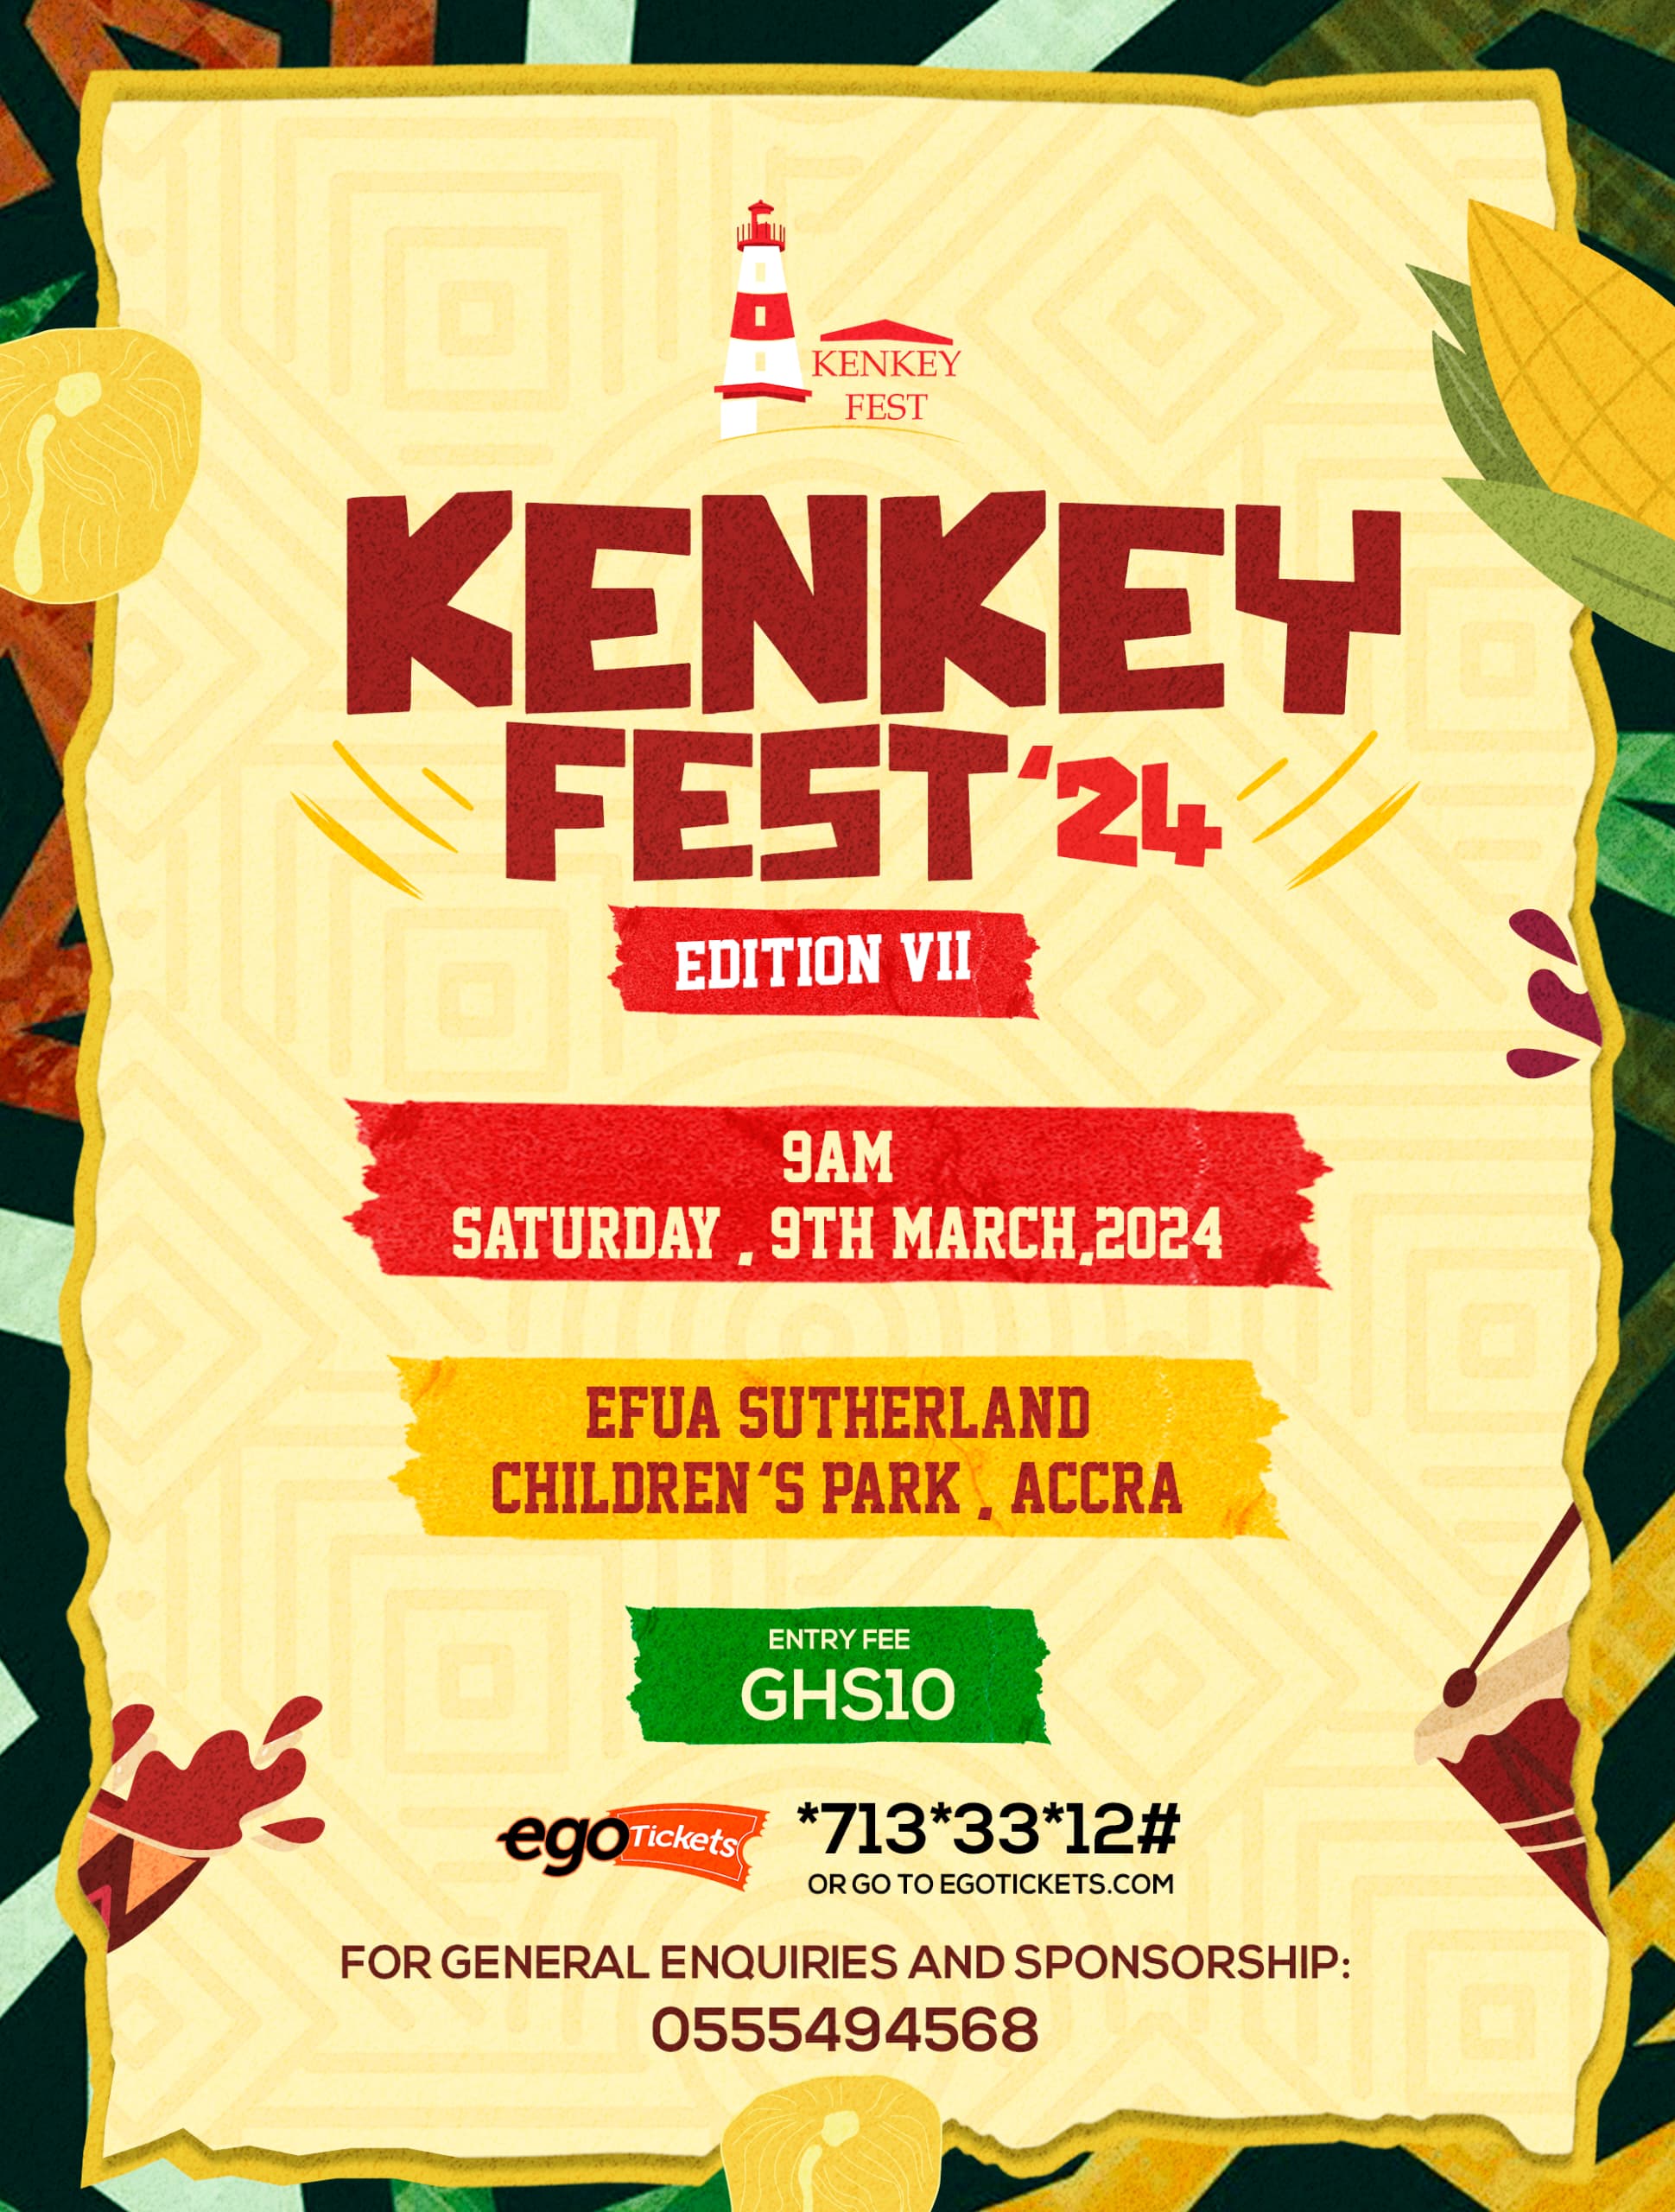 Kenkey Festival teams up with One Heart Cares Int\'l to support renal patients